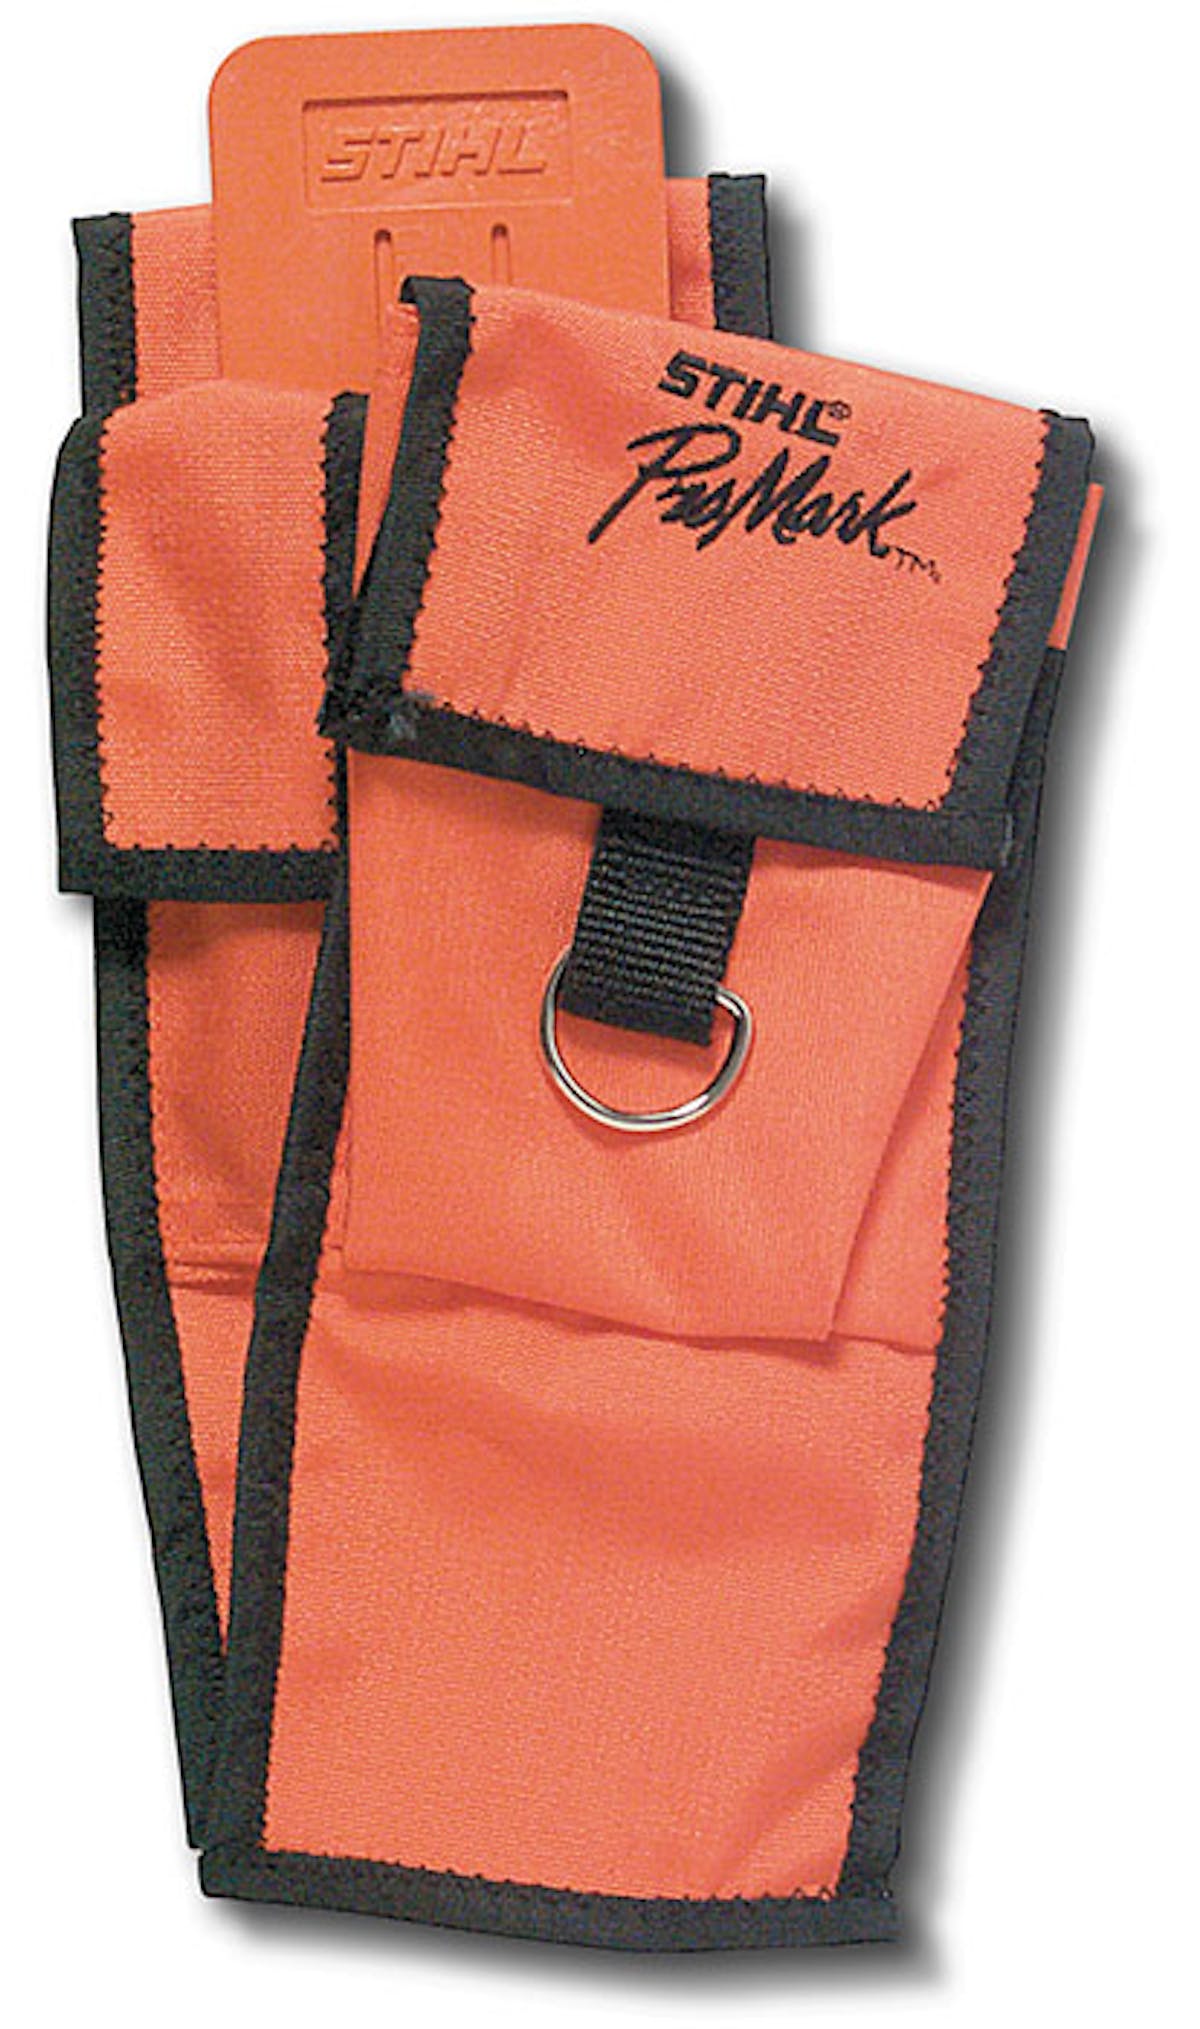 Wedge Tool Pouch